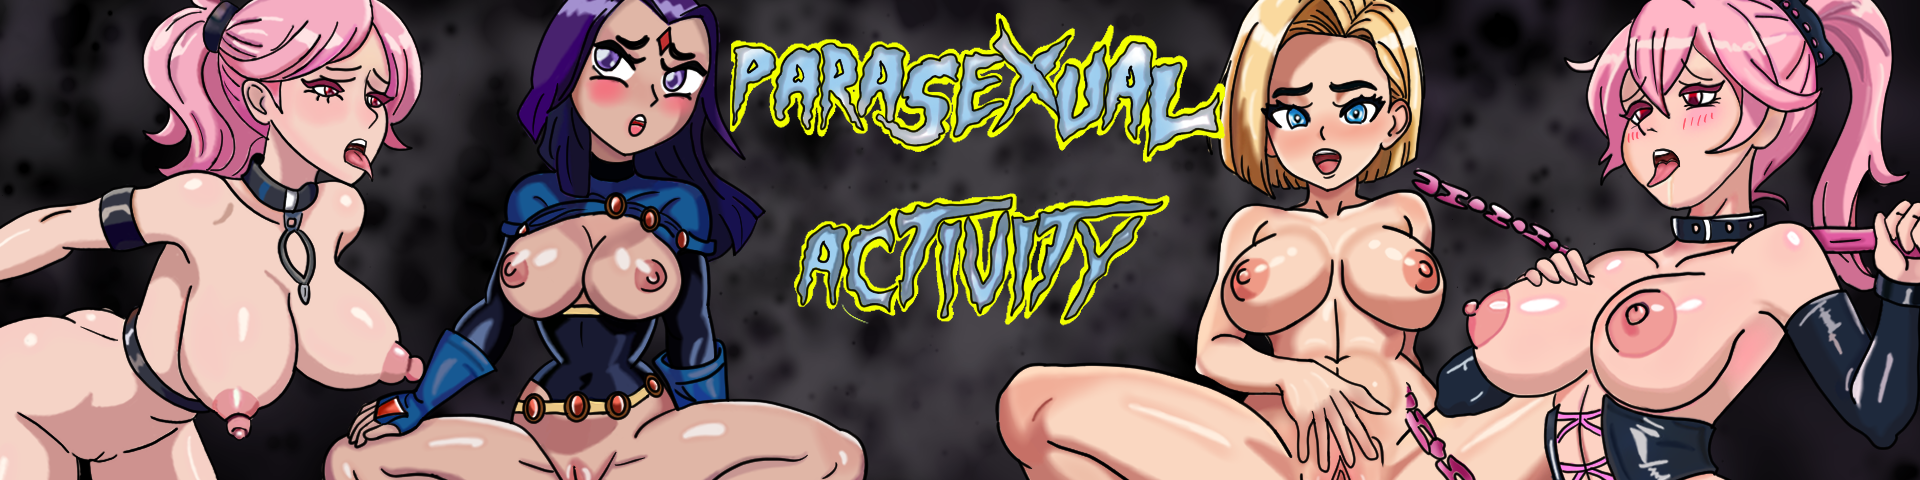 Parasexual Activity V 0.7 Update Kinky Ghosty